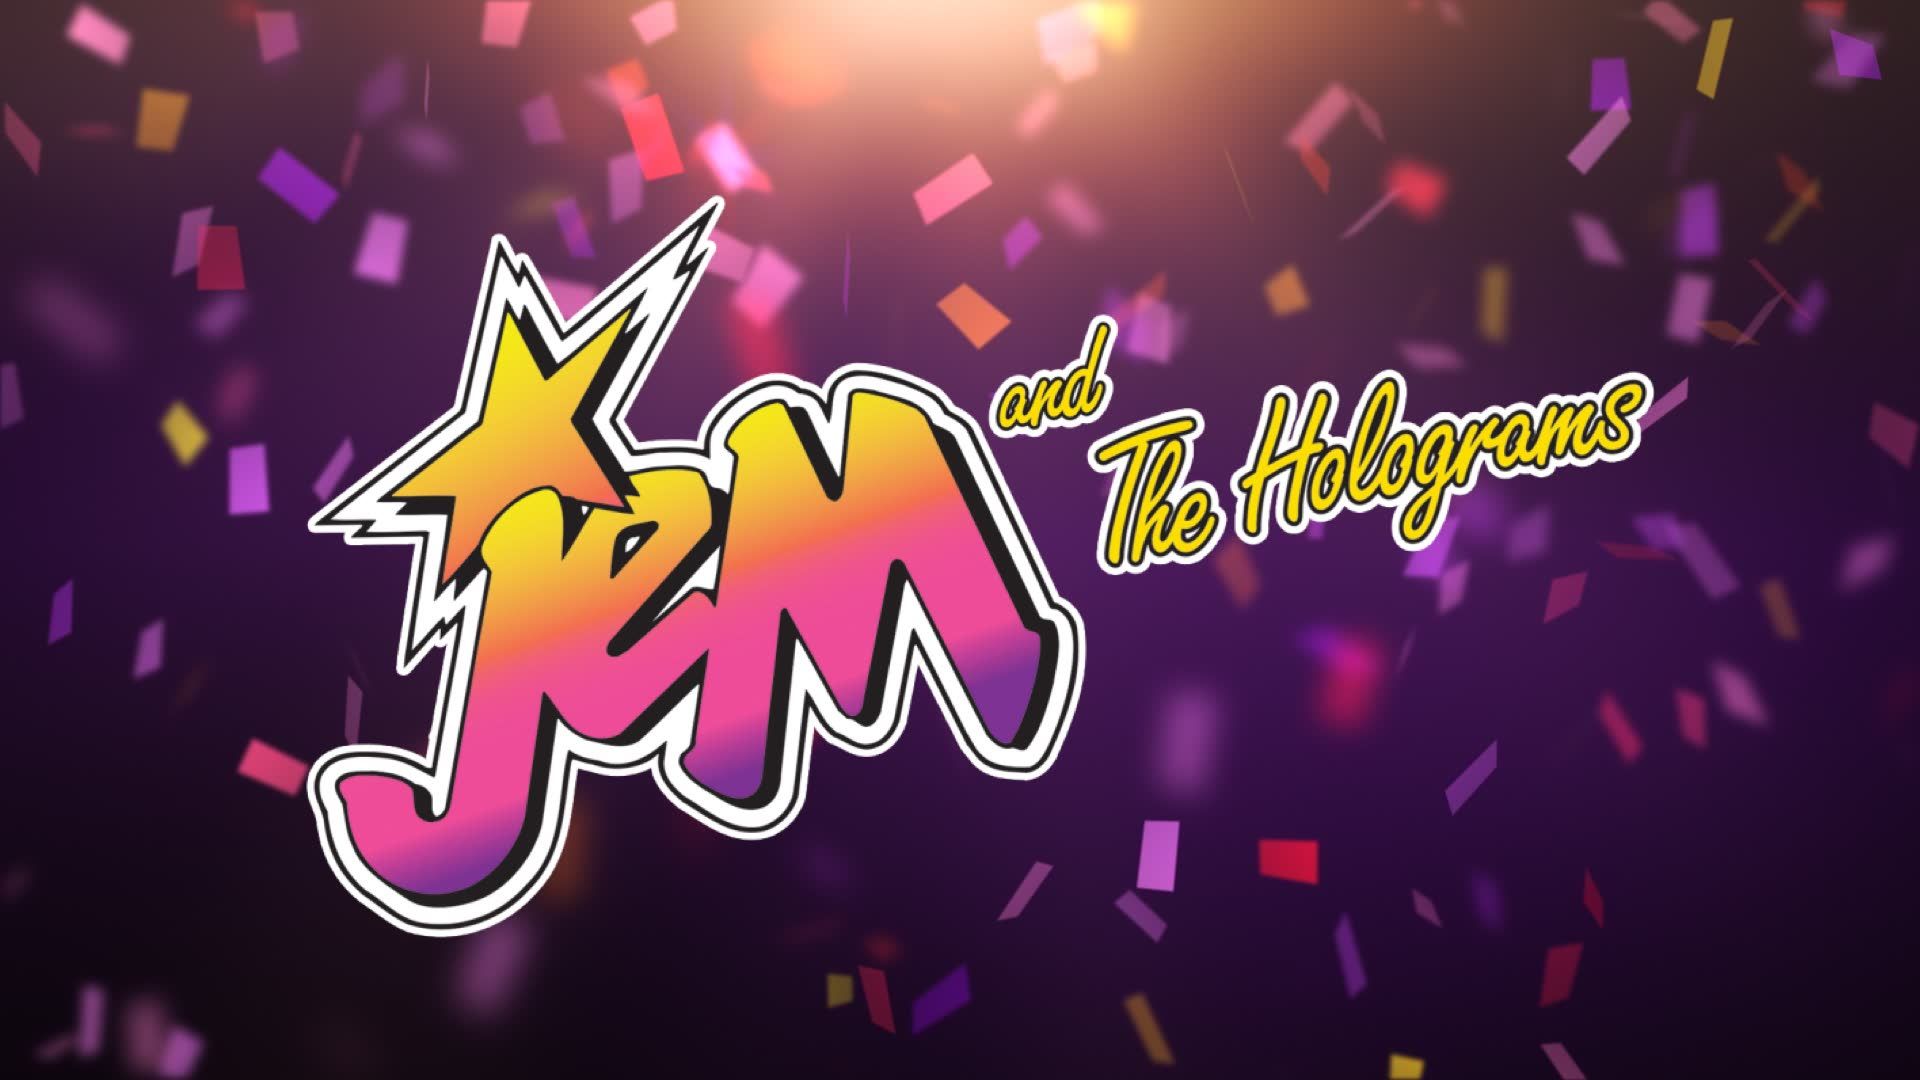 Jem and the holograms wallpaper